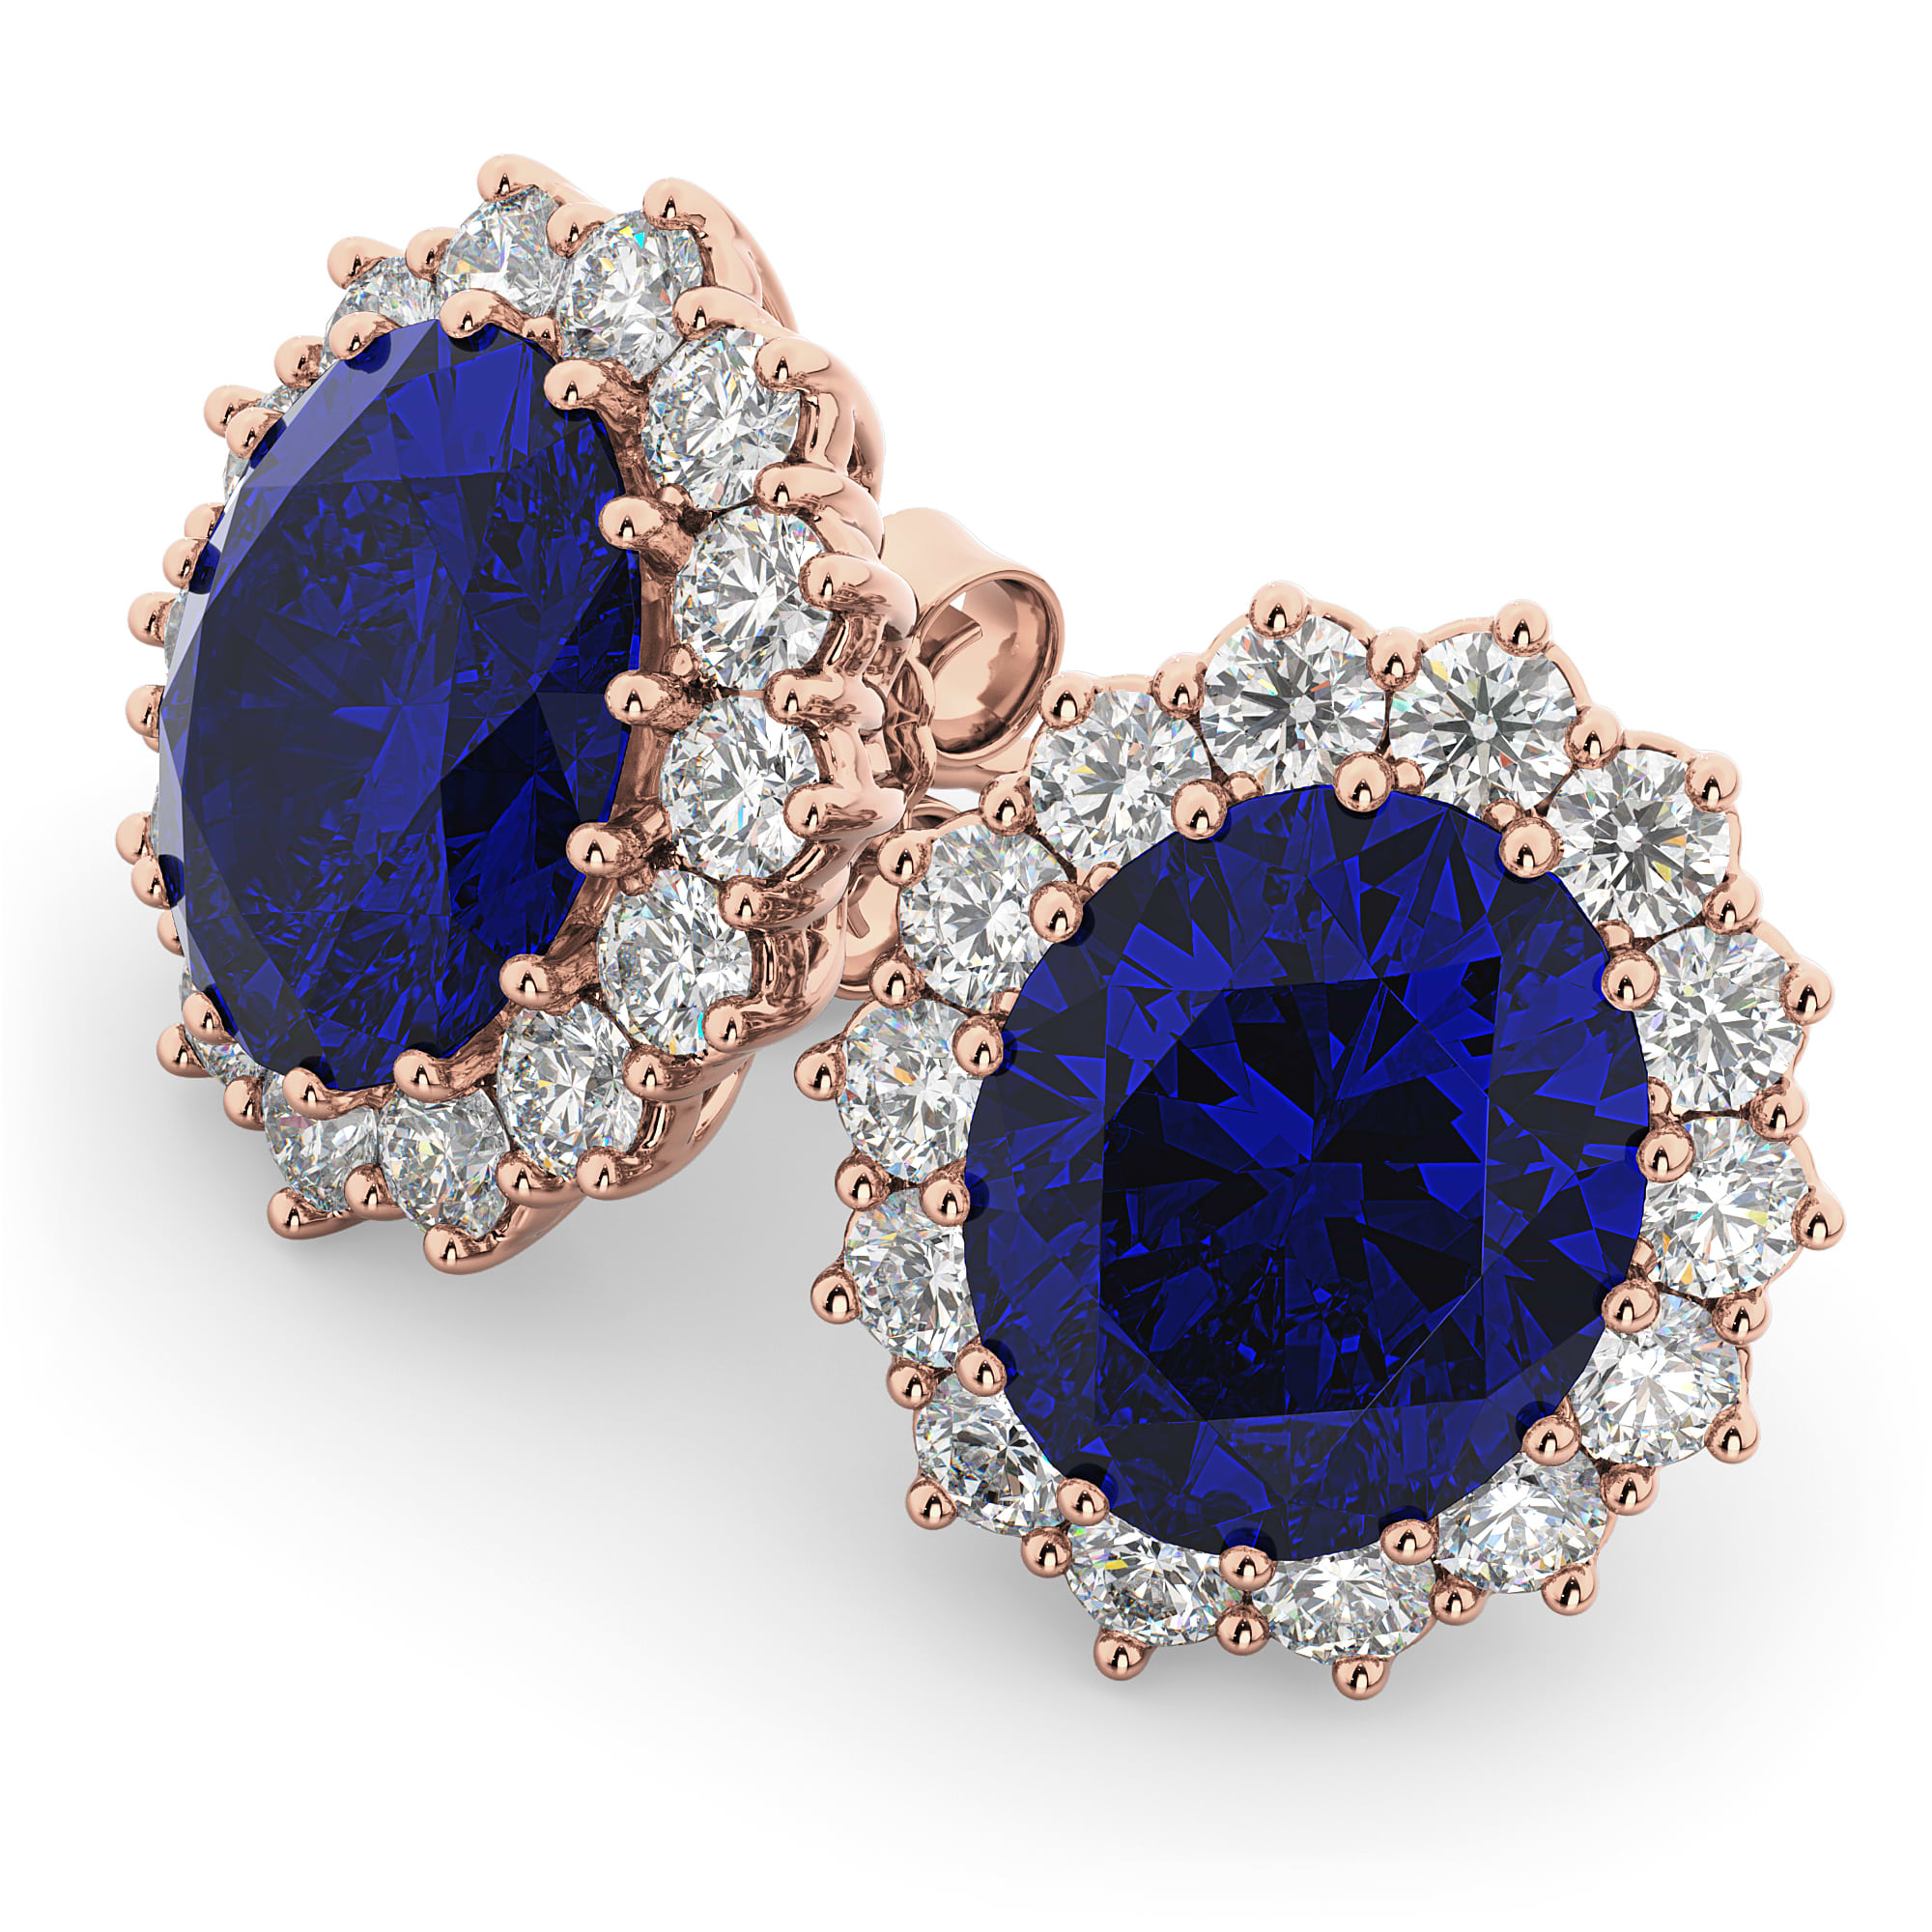 Oval Blue Sapphire & Diamond Accented Earrings 18k Rose Gold (10.80ctw)